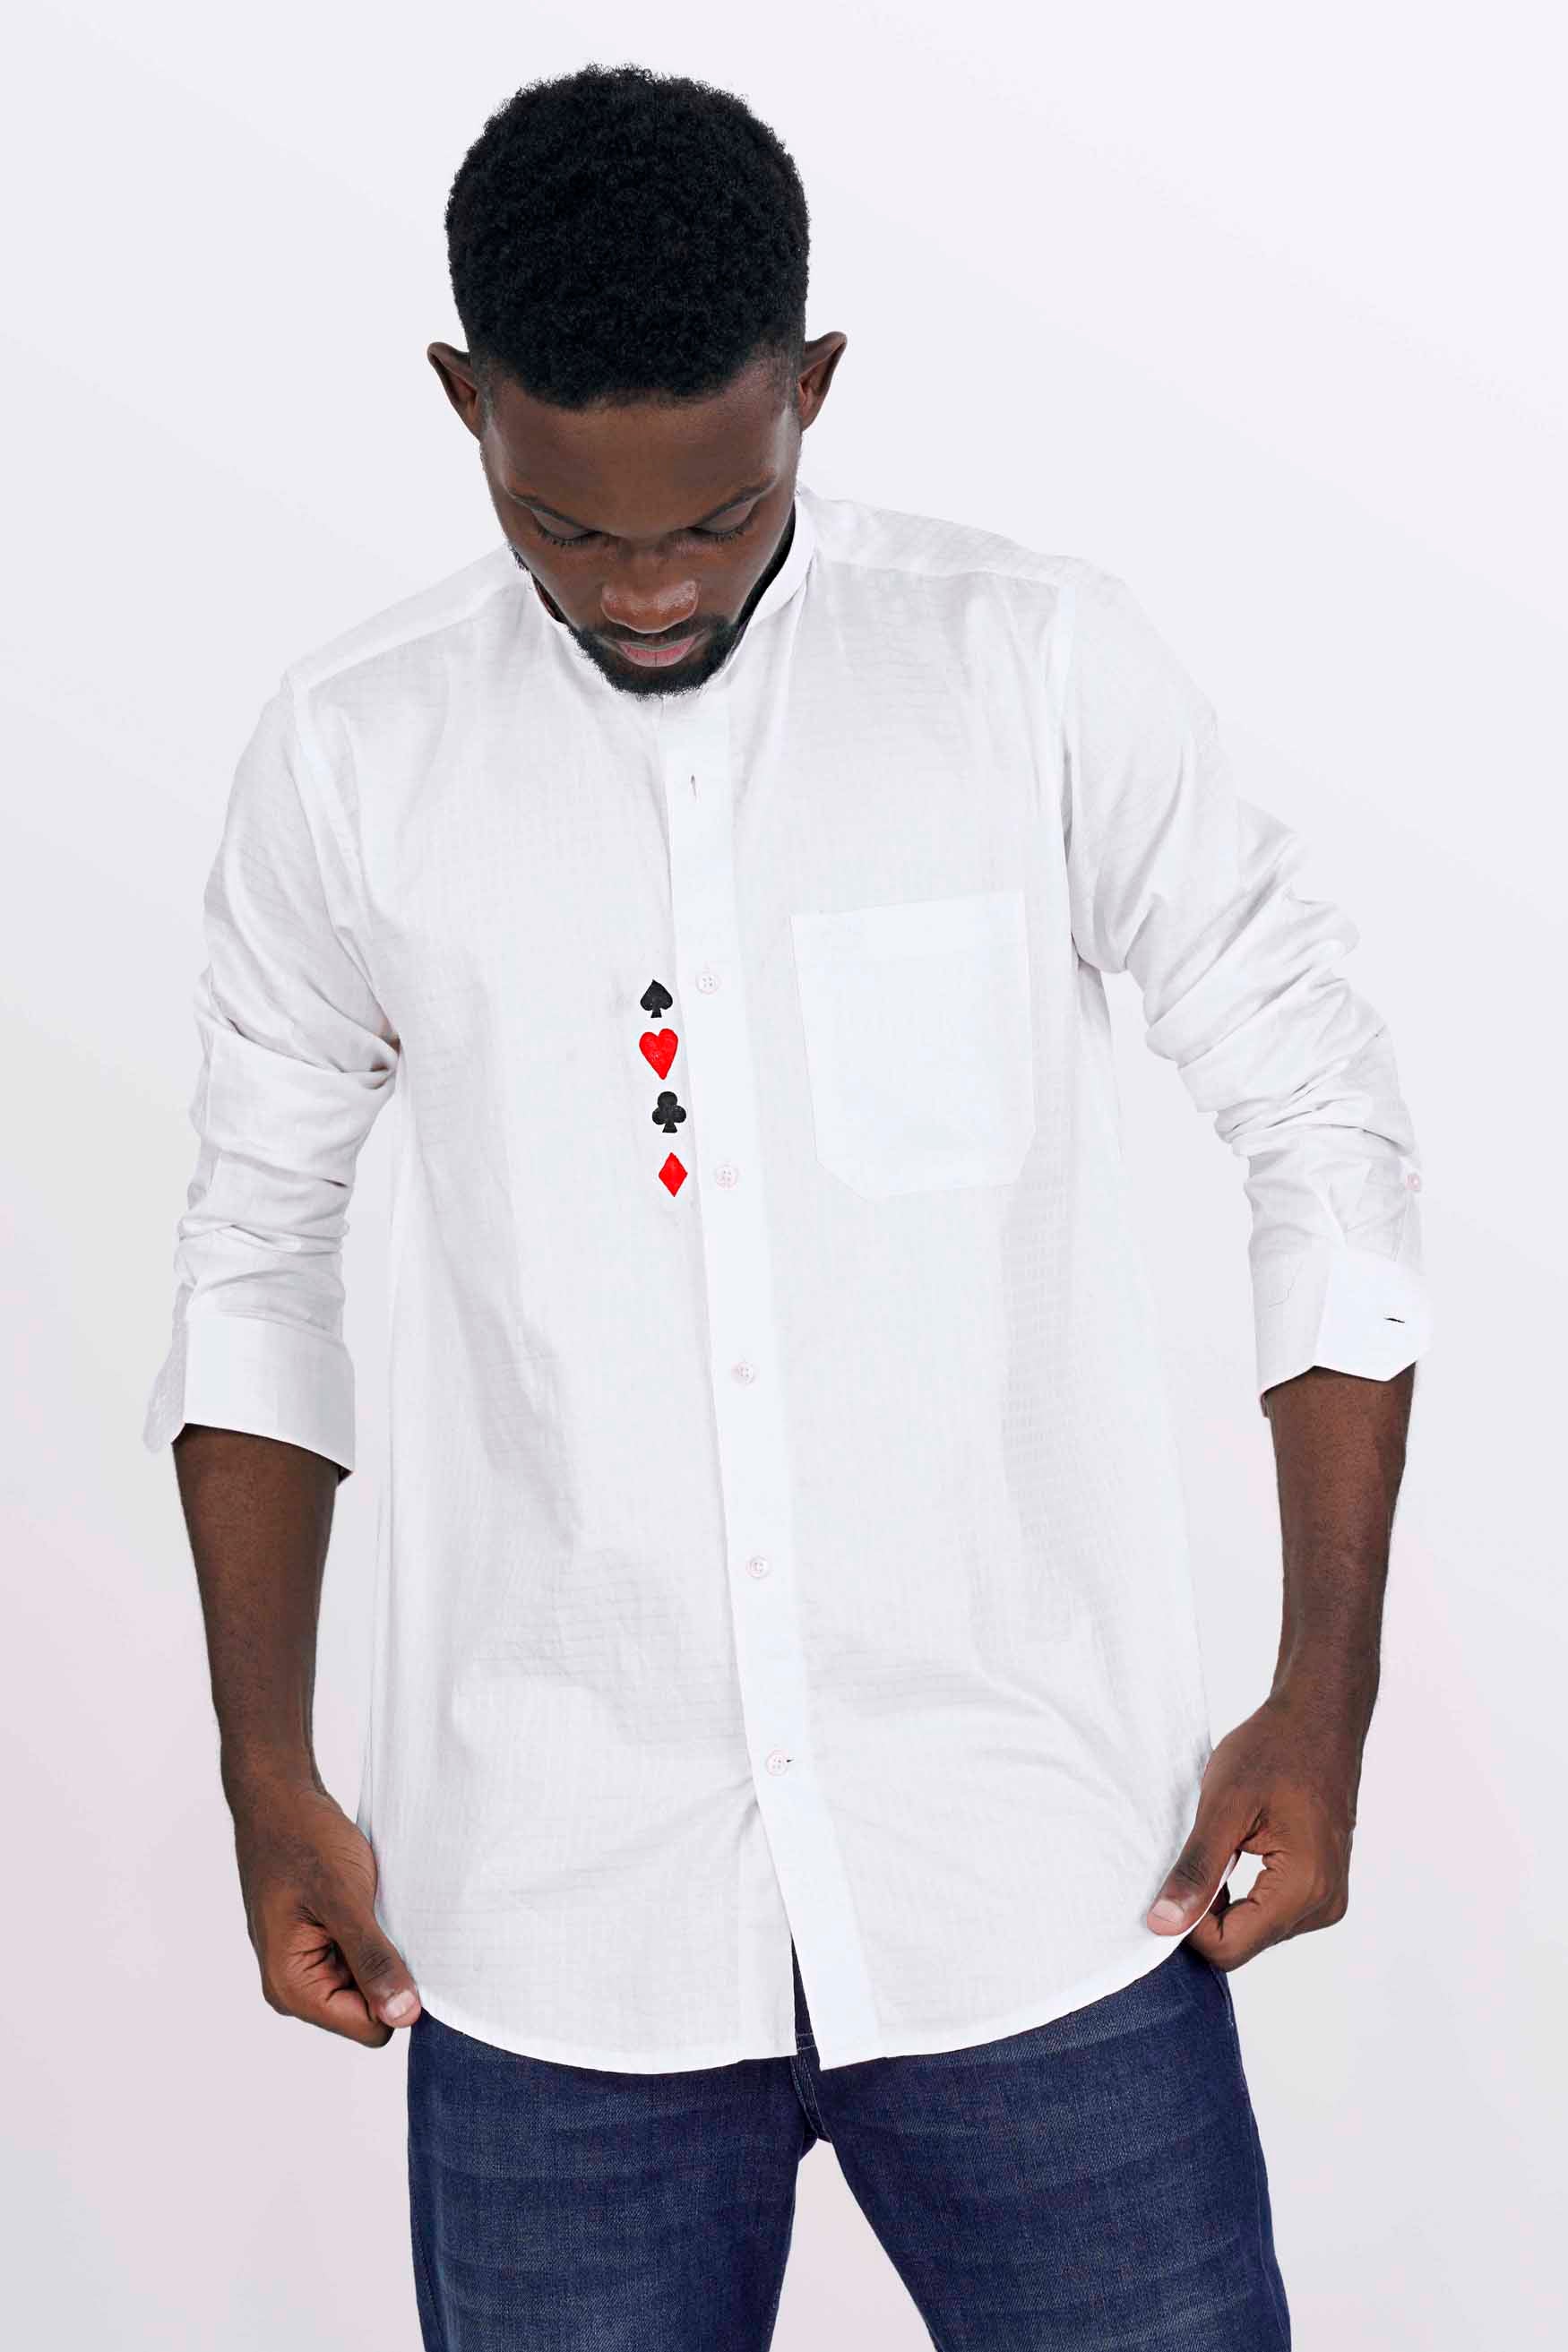 Bright White with Guardsman Red and Black Hand Painted Dobby Textured Premium Giza Cotton Shirt 6334-M-ART-38, 6334-M-ART-H-38, 6334-M-ART-39, 6334-M-ART-H-39, 6334-M-ART-40, 6334-M-ART-H-40, 6334-M-ART-42, 6334-M-ART-H-42, 6334-M-ART-44, 6334-M-ART-H-44, 6334-M-ART-46, 6334-M-ART-H-46, 6334-M-ART-48, 6334-M-ART-H-48, 6334-M-ART-50, 6334-M-ART-H-50, 6334-M-ART-52, 6334-M-ART-H-52